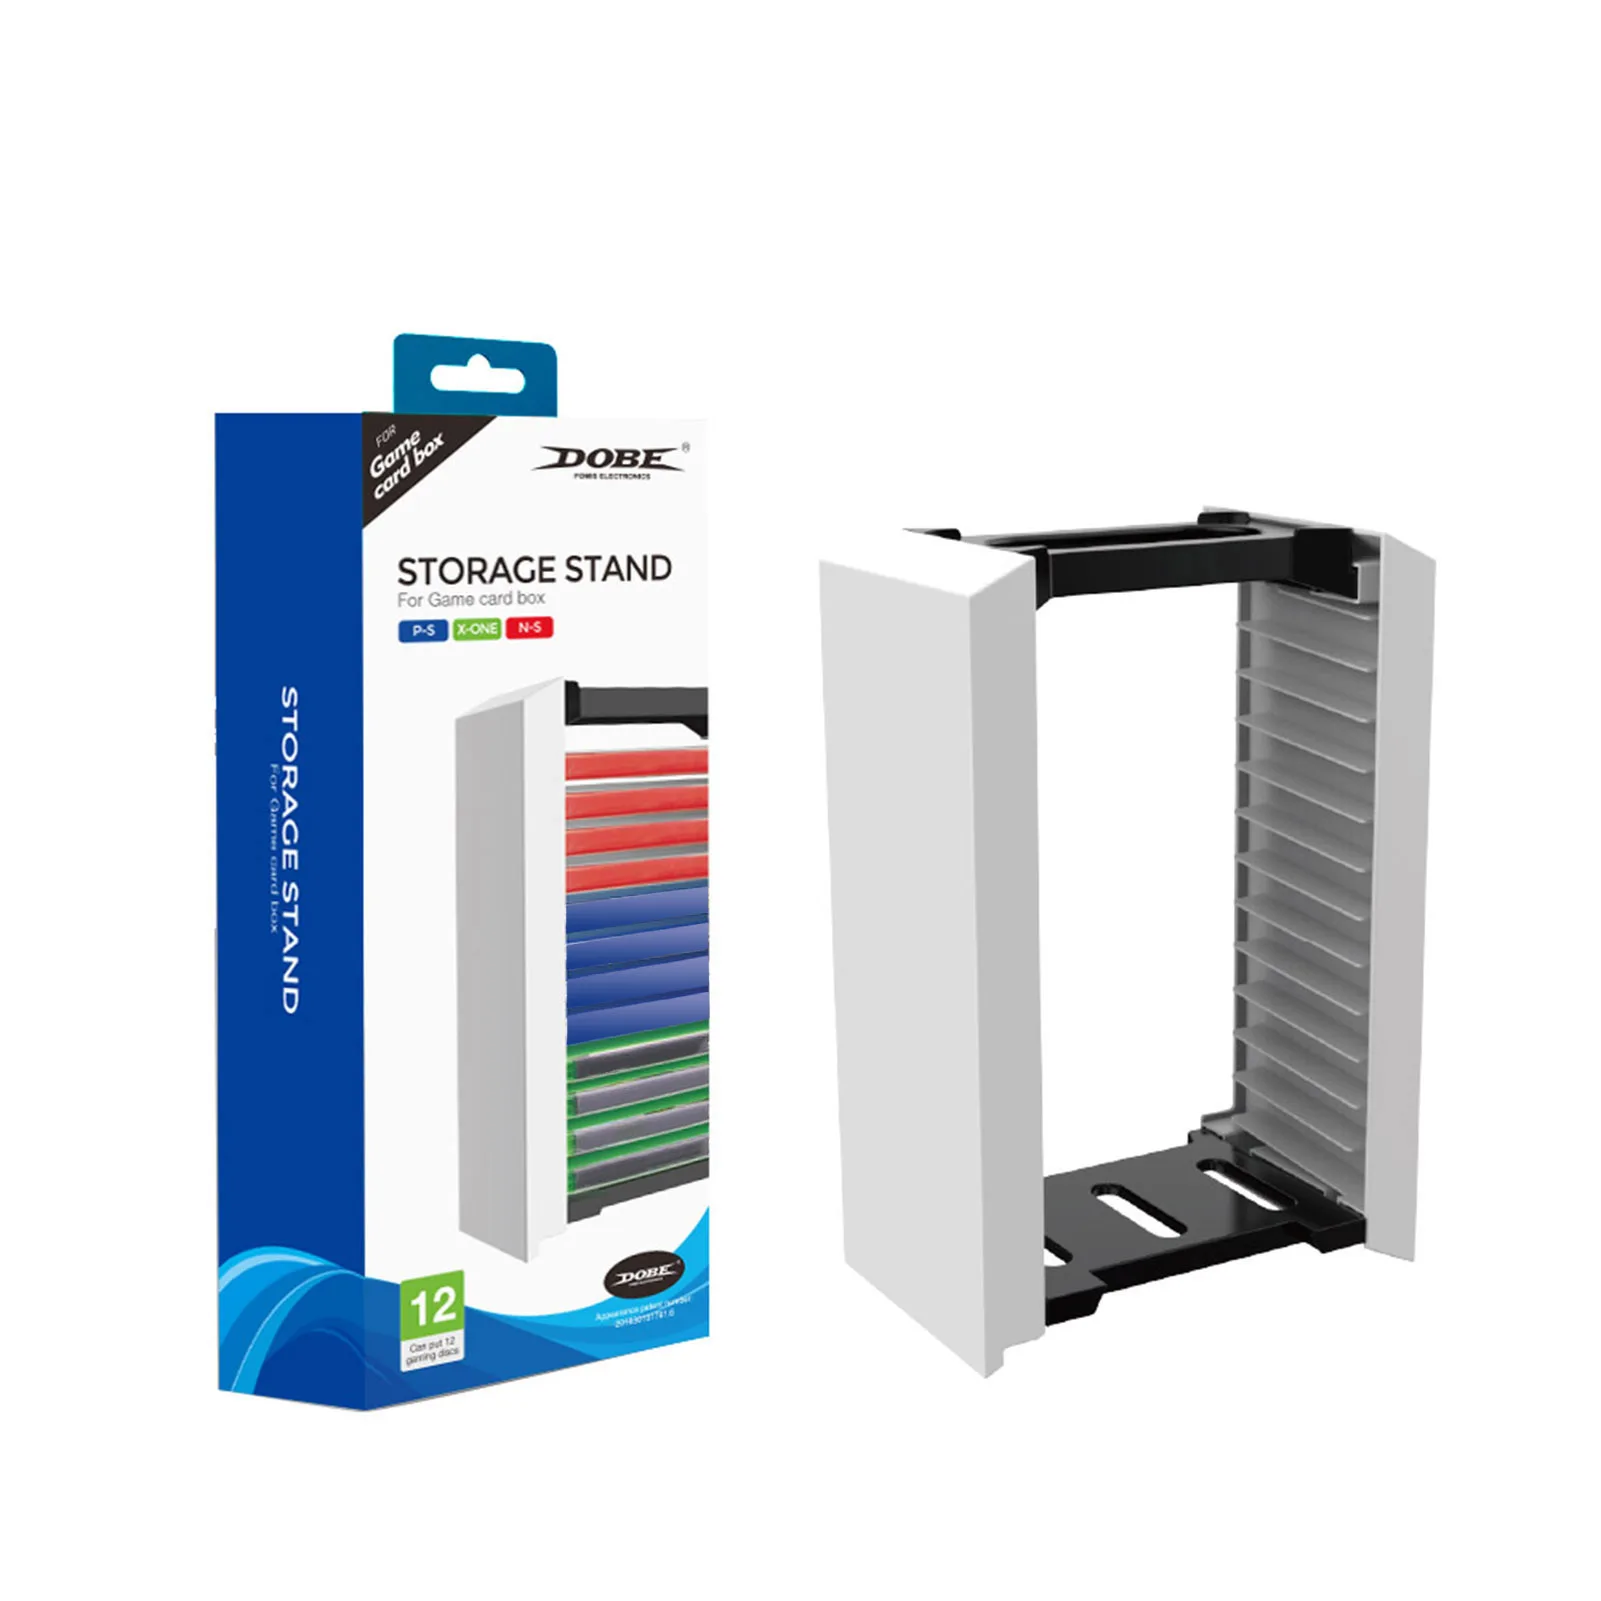 

Host Disk Tower For PS 5 Host Game Disk Tower Storage Rack 12 Game Discs For PS4 Switch One Bracket Storage Tower Shelf Rack